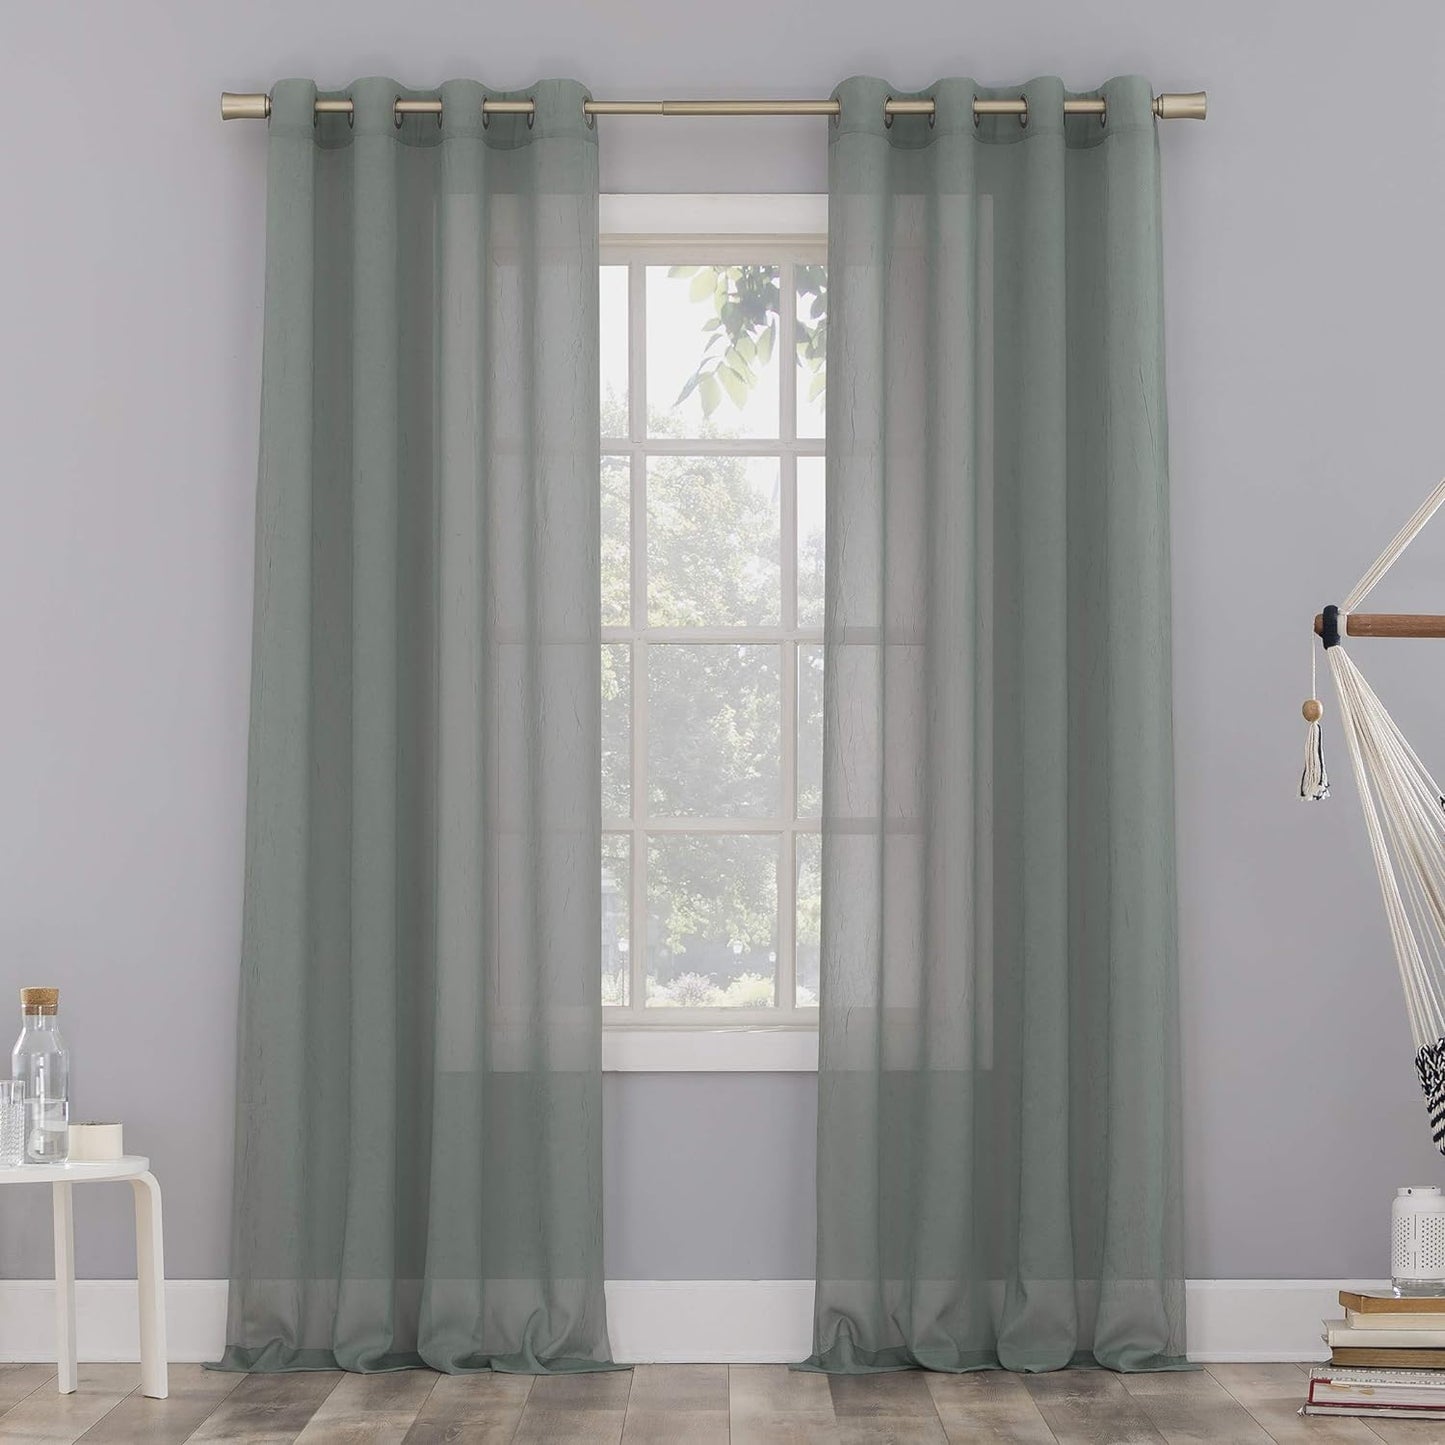 No. 918 Erica Crushed Sheer Voile Grommet Curtain Panel 84.00" X 51.00"  No. 918 Mineral Blue 51" X 84" Panel 